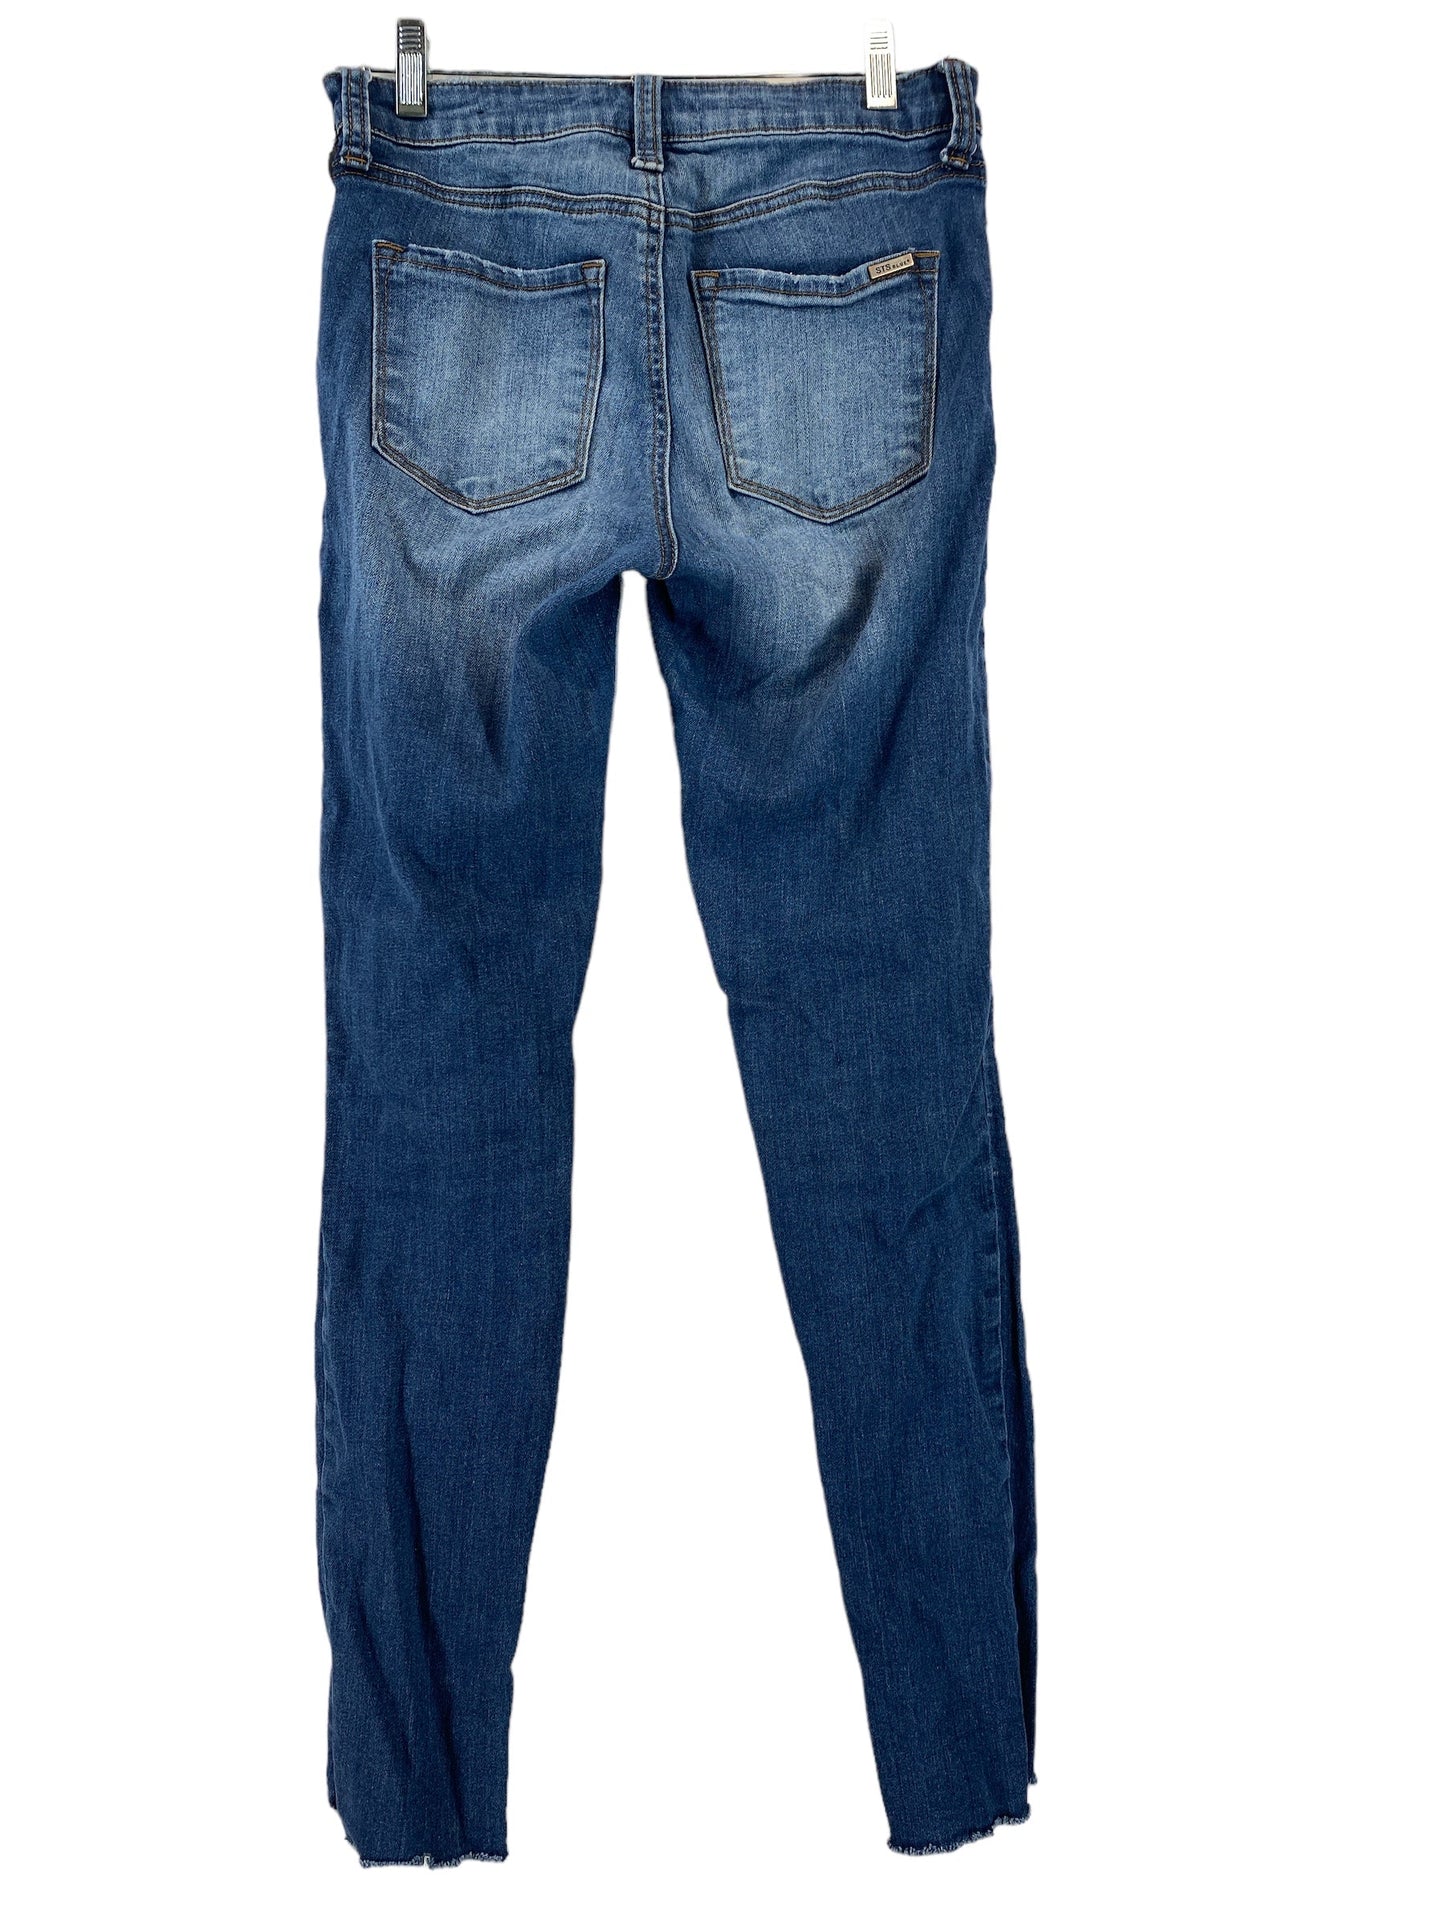 Jeans Skinny By Sts Blue  Size: 0